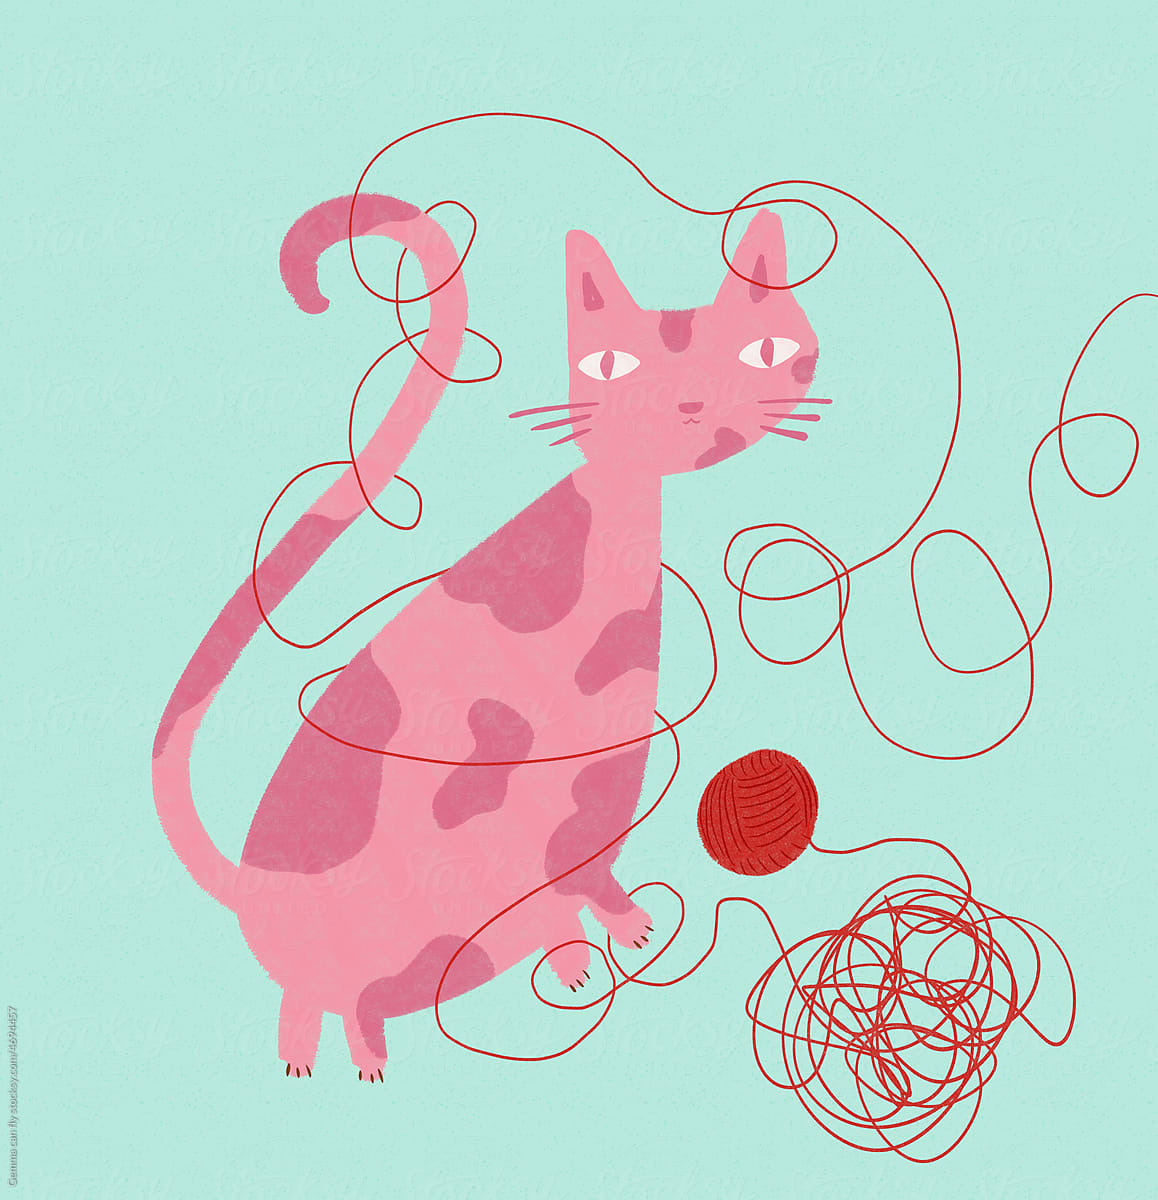 Cat playing with ball of wool, illustration